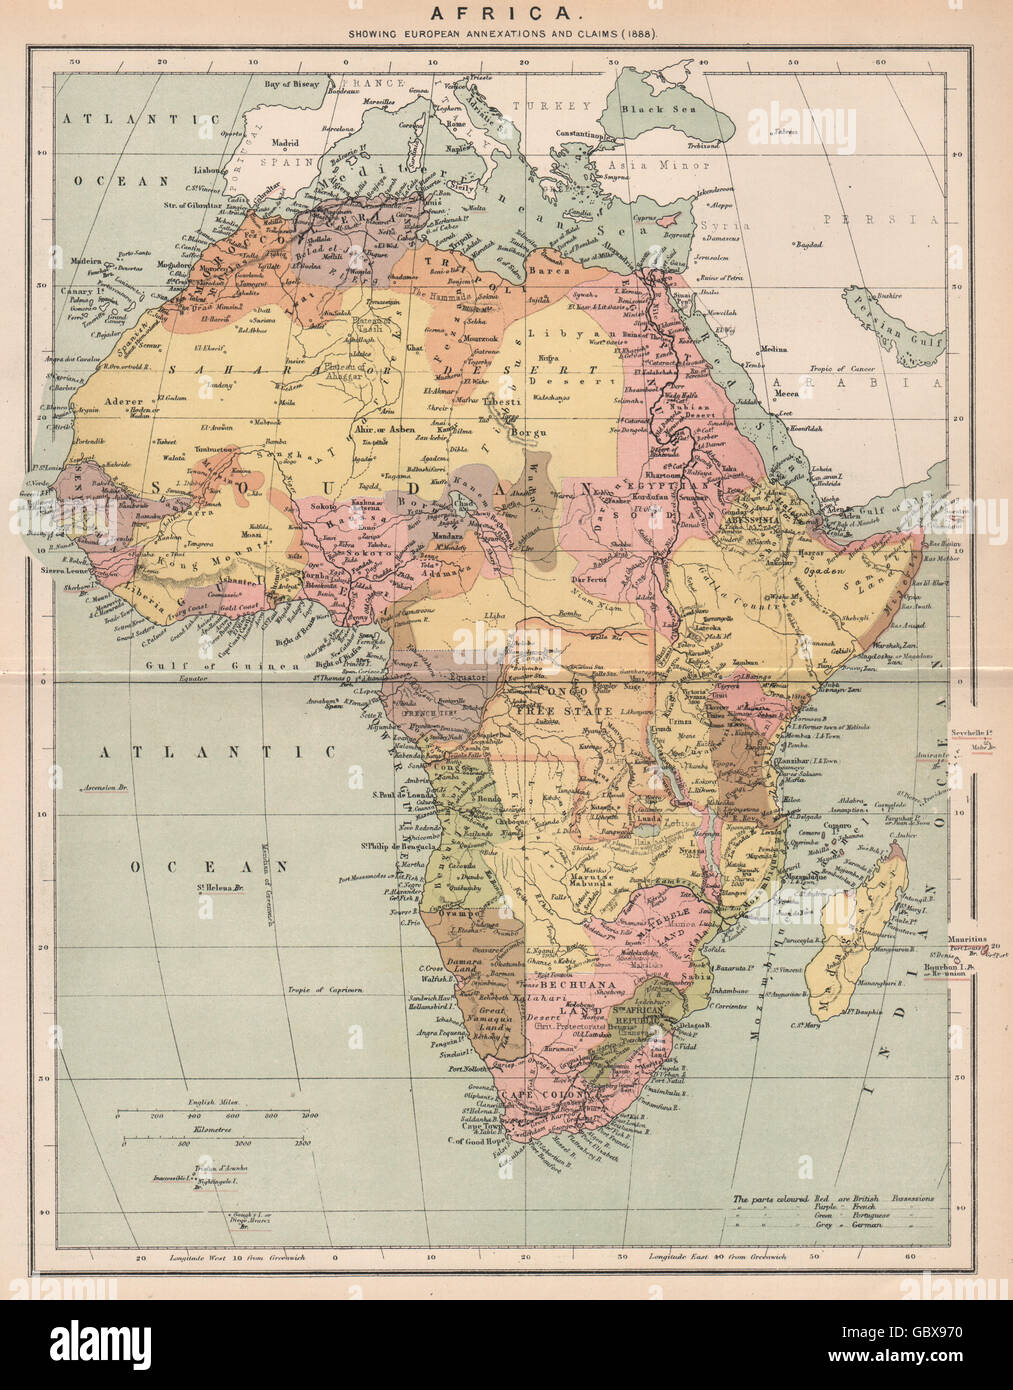 Africa. South Africa, 1885 antique map Stock Photo